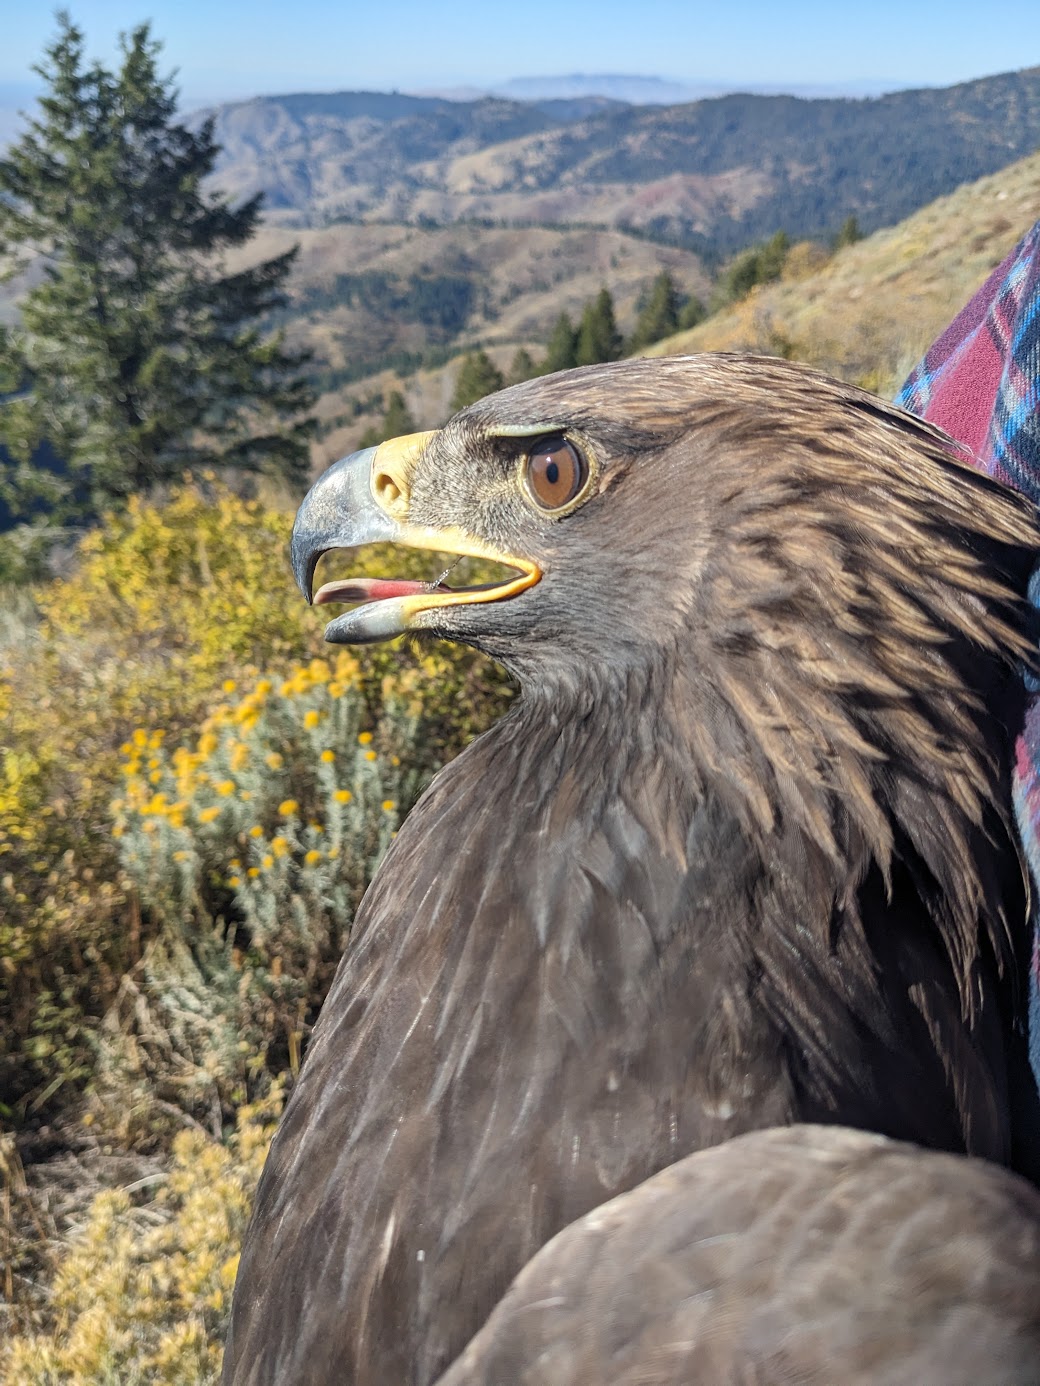 A profile of a Golden Eagle with a fierce look in her deep brown eyes. Her body is covered in dark brown feathers with golden tips on the nape of the neck. The red and blue flannel shirt of the bander is partially visible on the right. There is blue sky, mountains dotted with green trees, and greenish-gray rabbitbrush with blooming yellow flowers in the background.